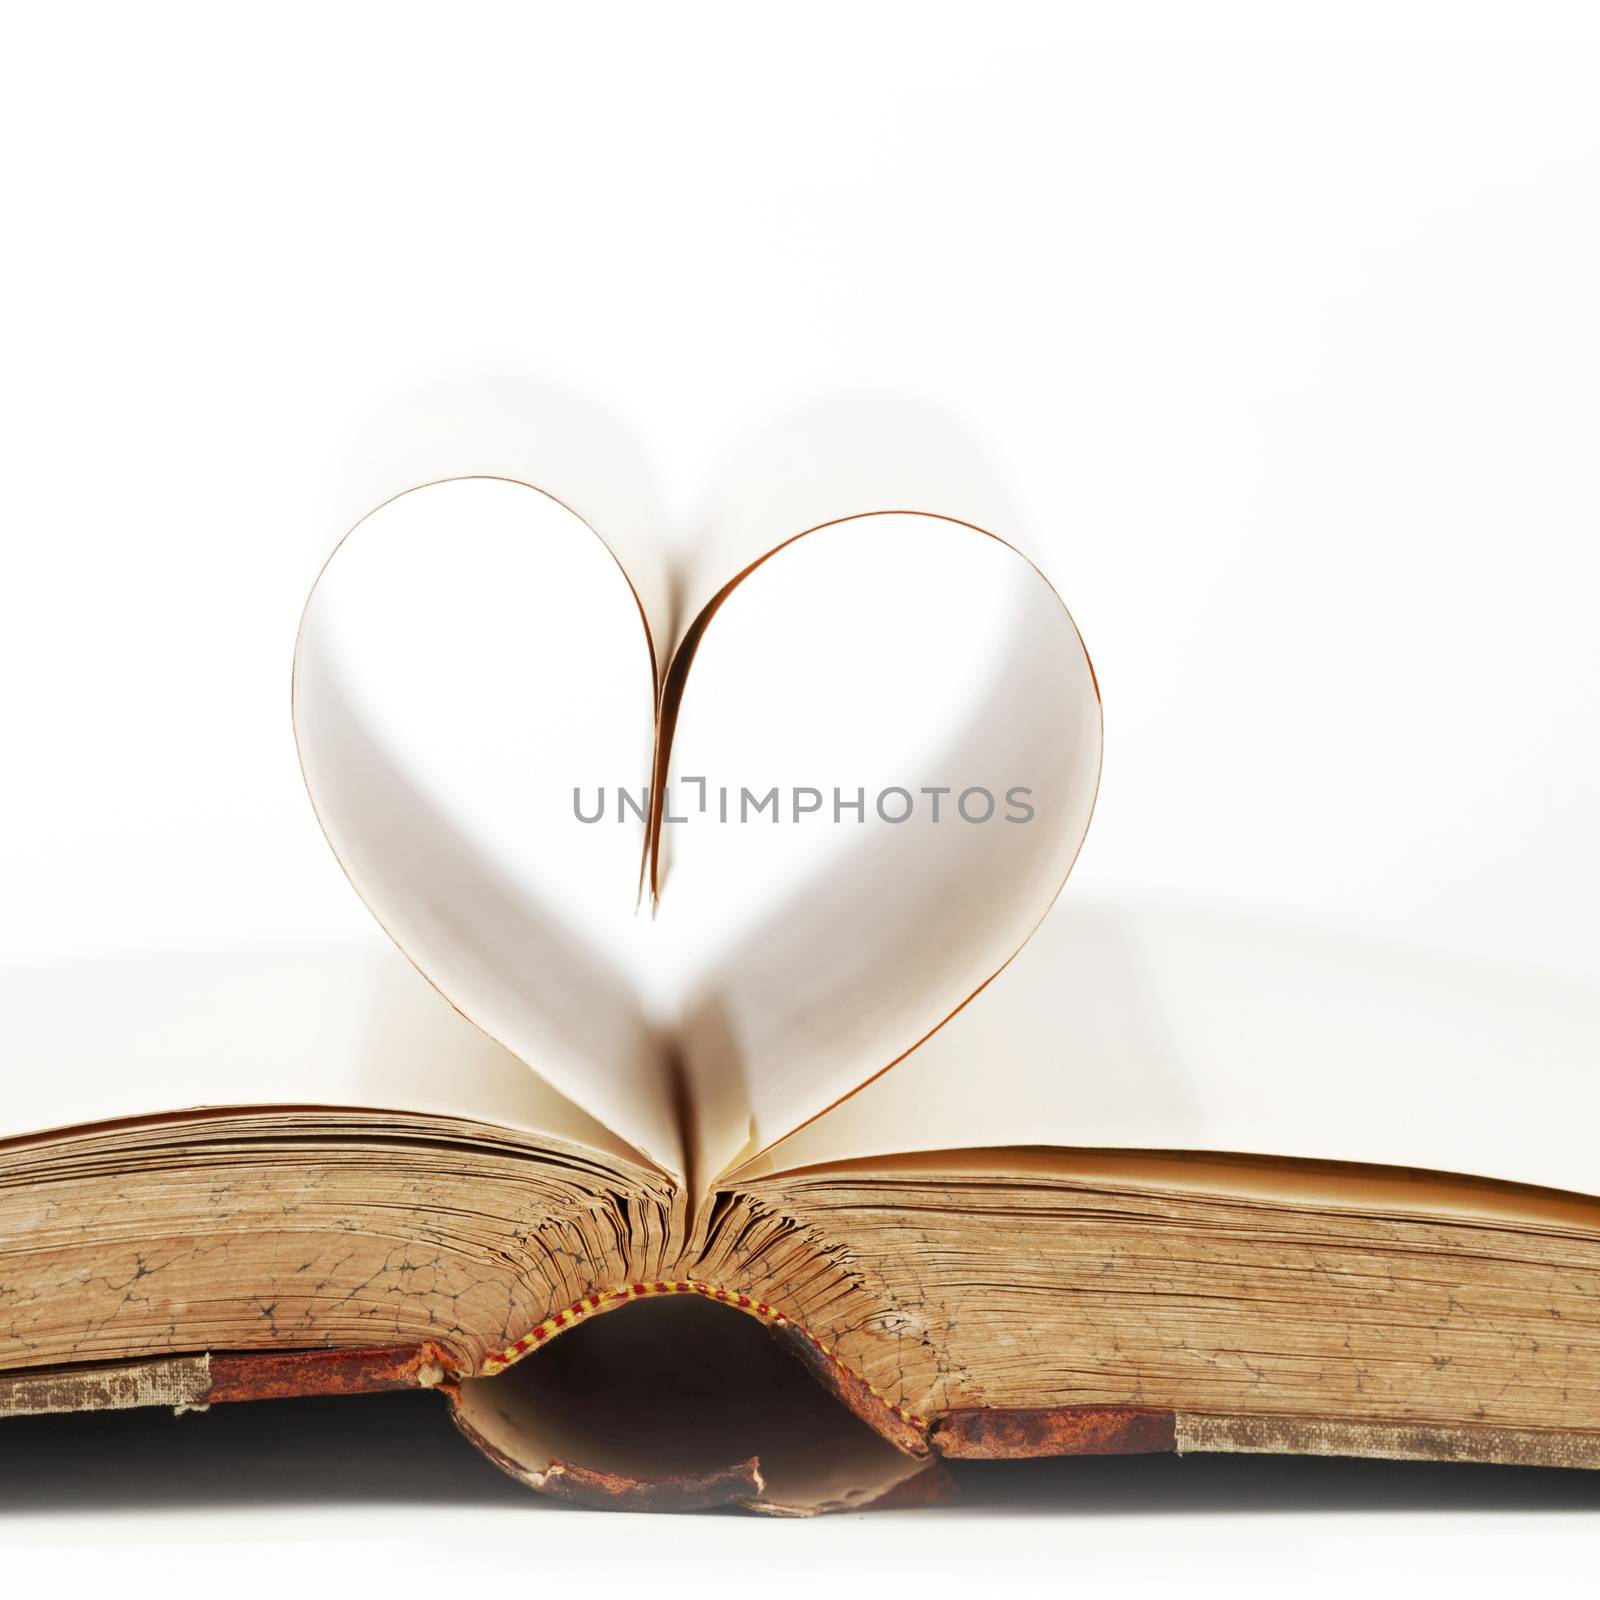 Heart made from book pages, love reading, Valentines day concept